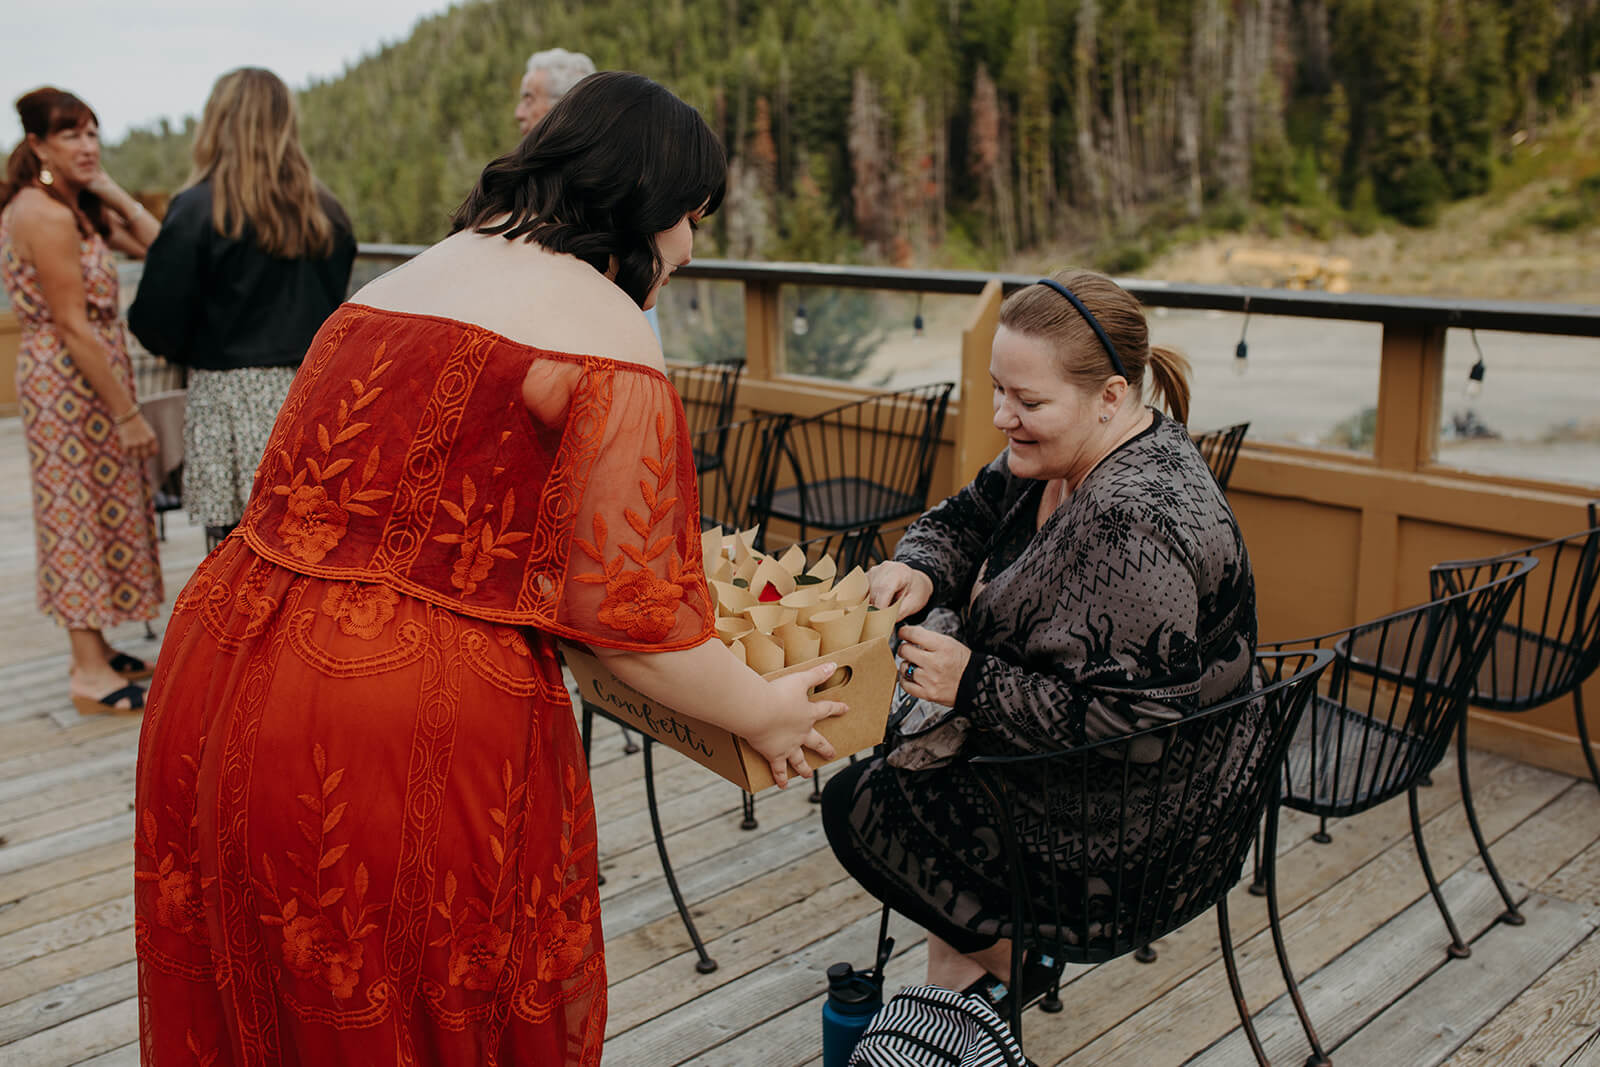 Guest passing out wedding favors at ski lodge wedding ceremony